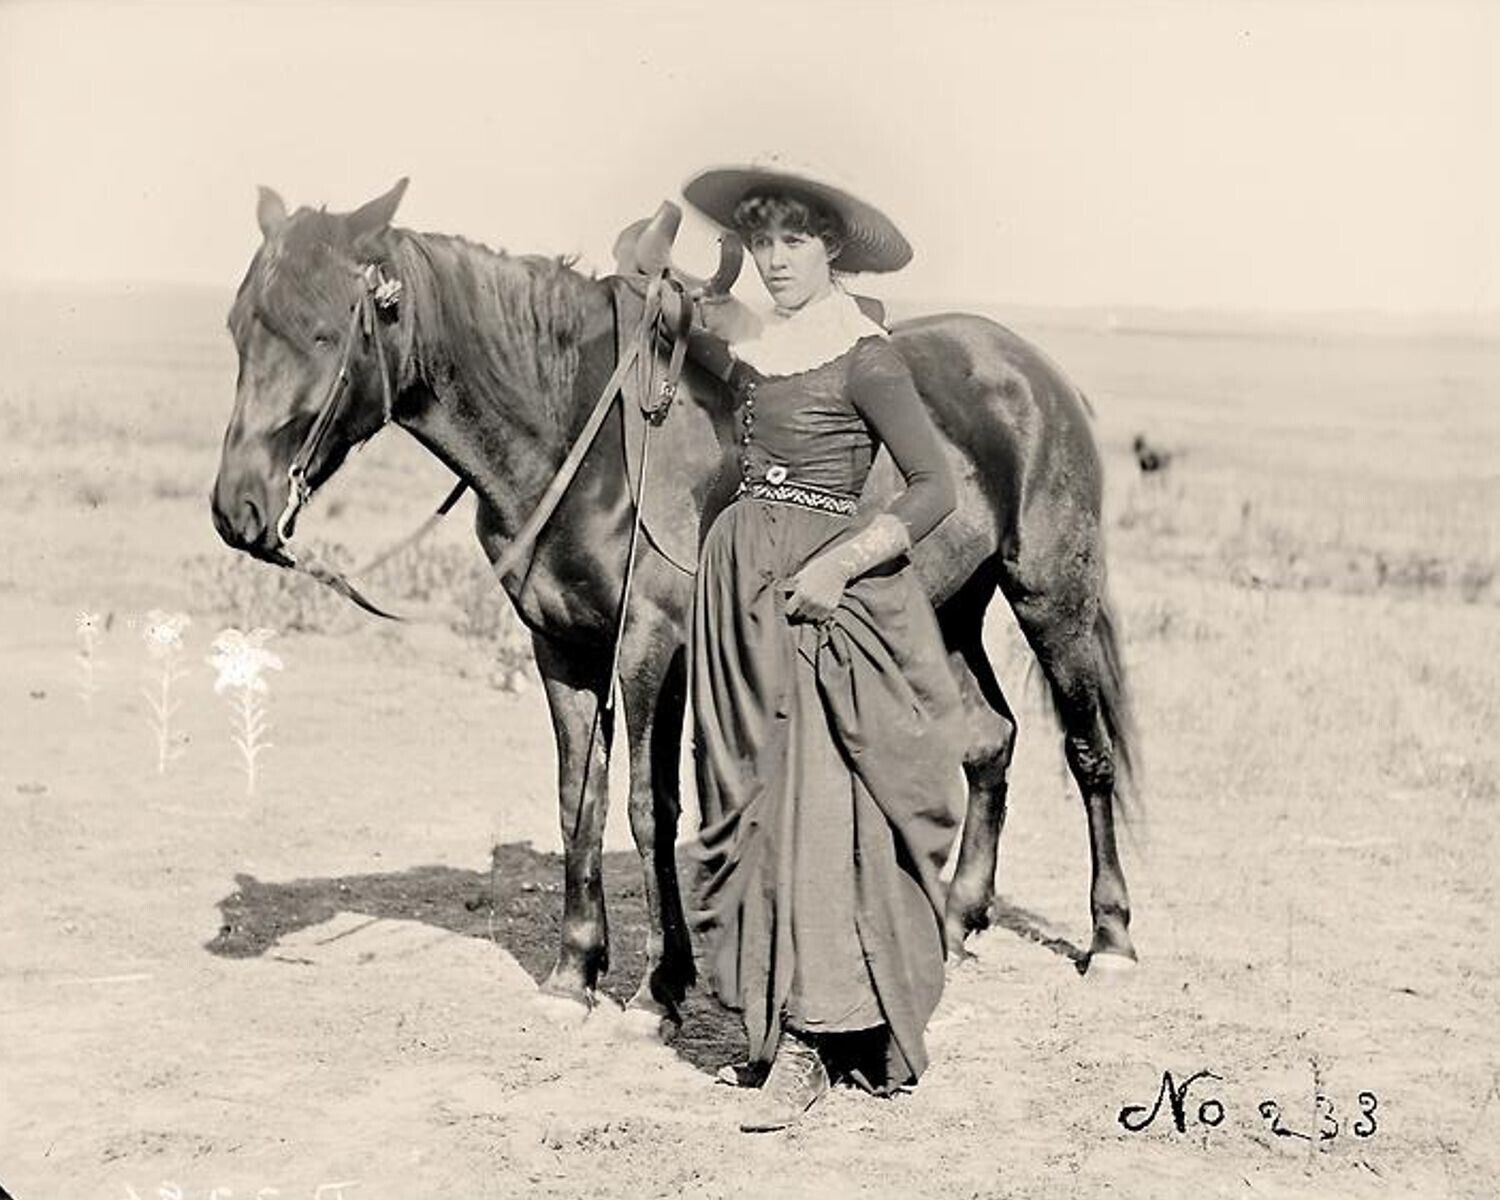 Old West Cowgirl  1880s  Vintage Old Photo 8 x 10  Reprint